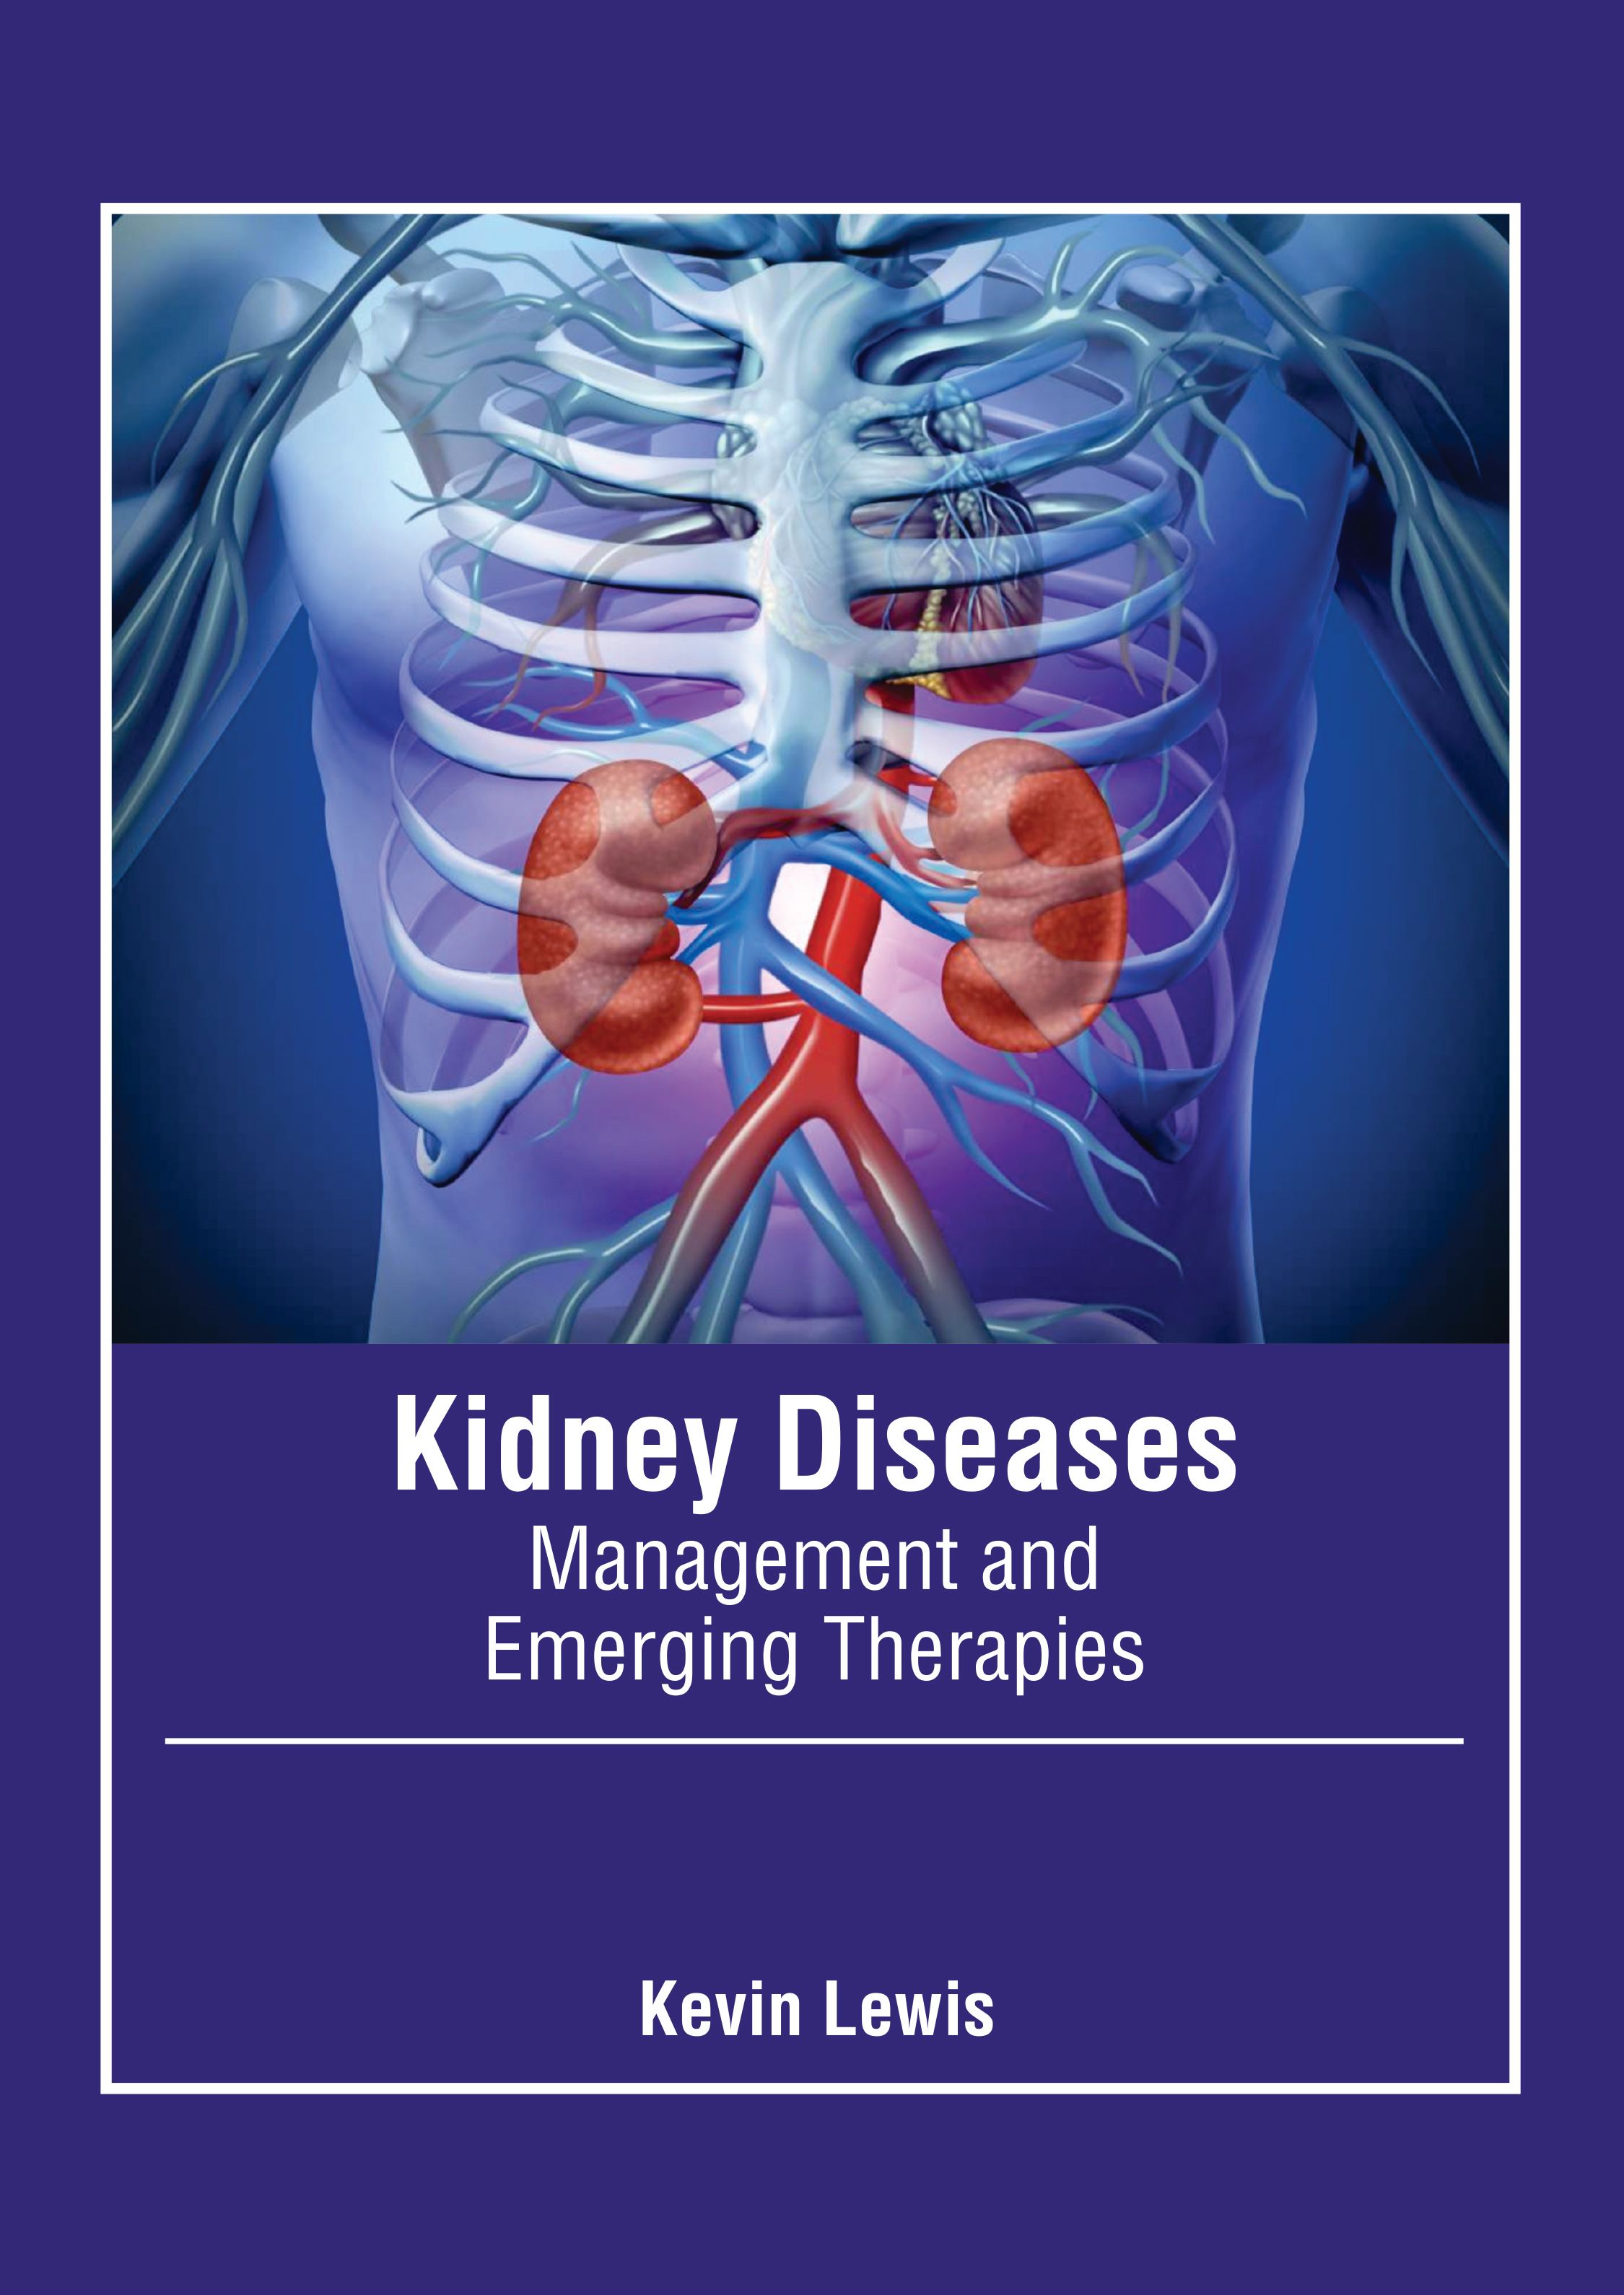 

medical-reference-books/nephrology/kidney-diseases-management-and-emerging-therapies-9781639277100